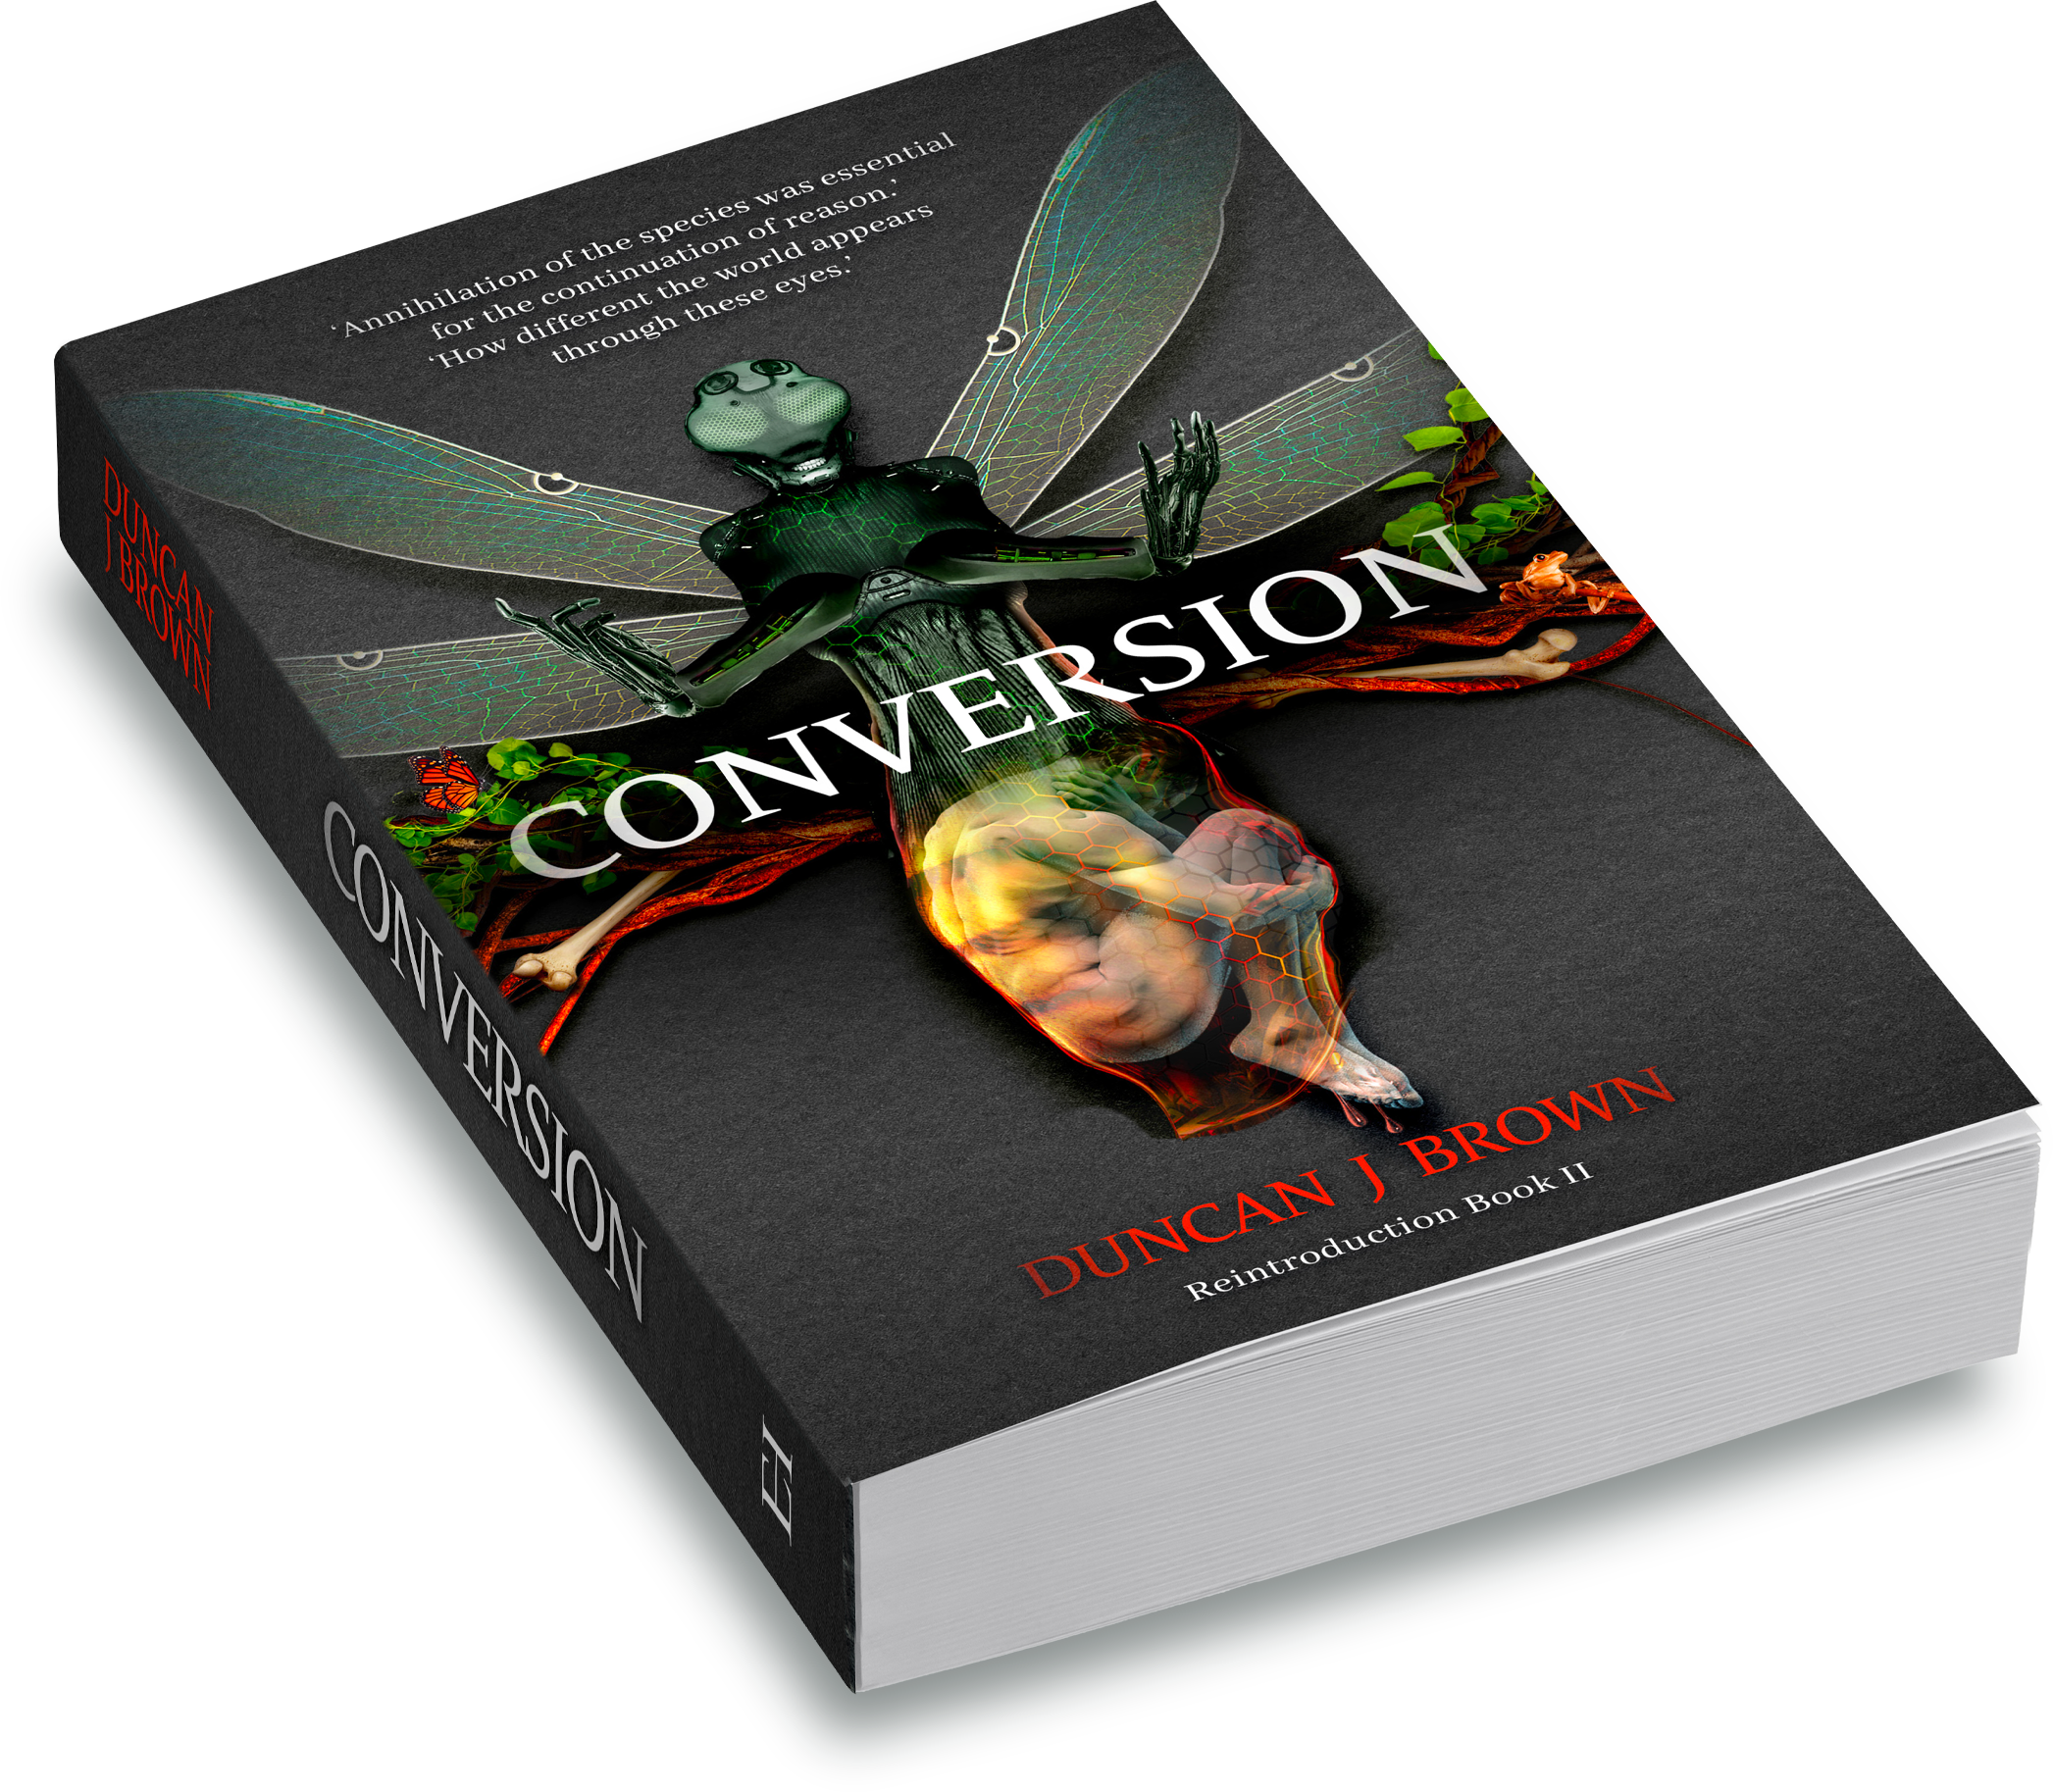 Conversion Book by author Duncan Brown